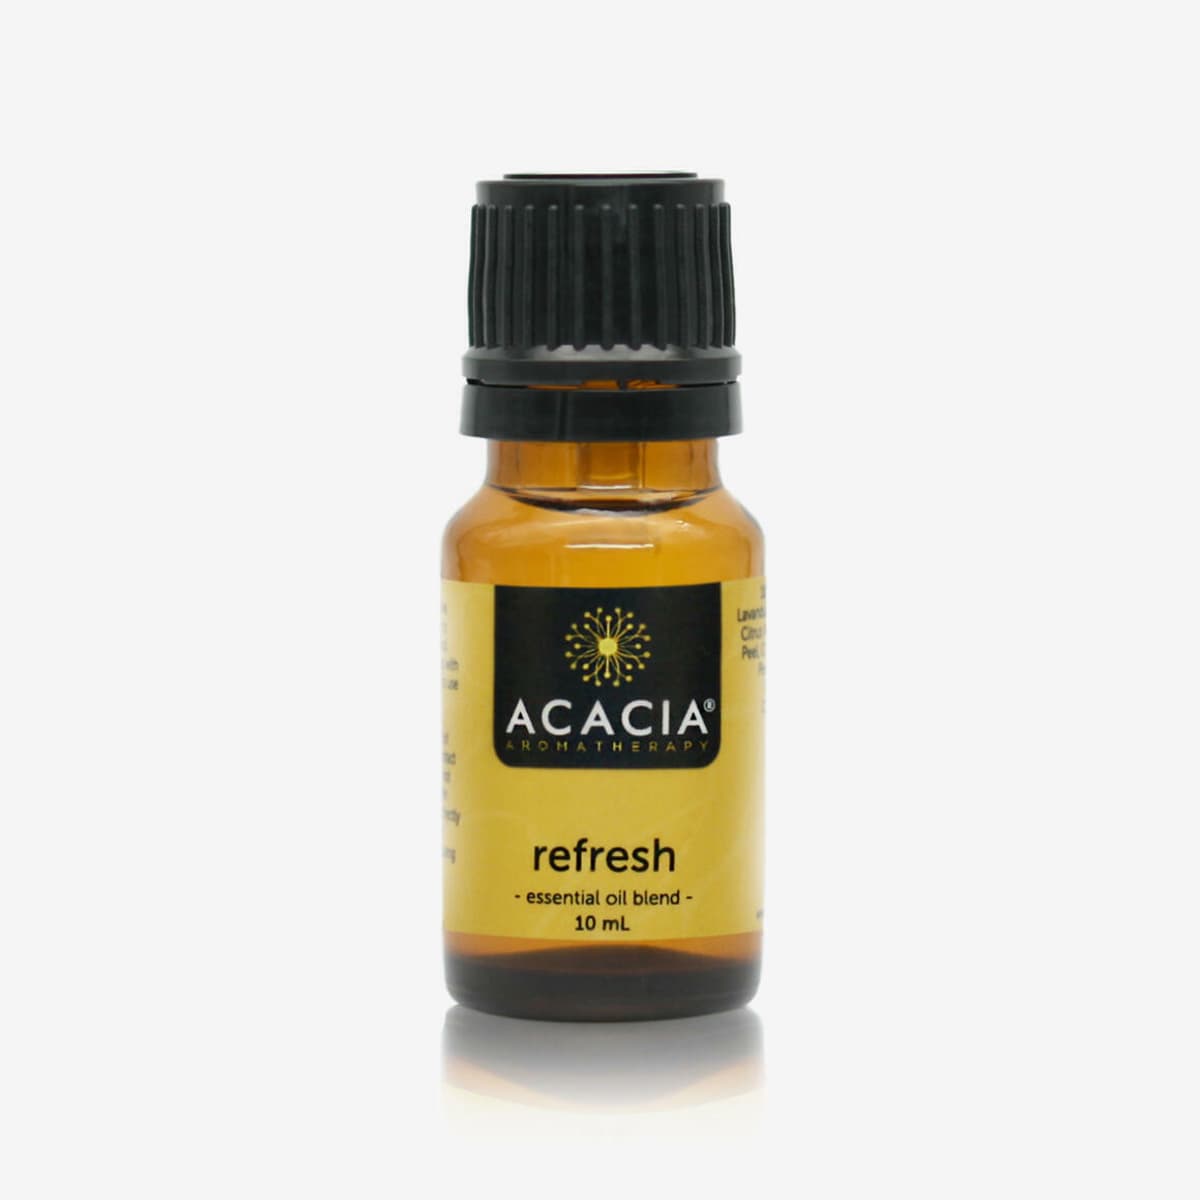 ACACIA AROMATHERAPY Refresh Pure Essential Oil Blend 10ml